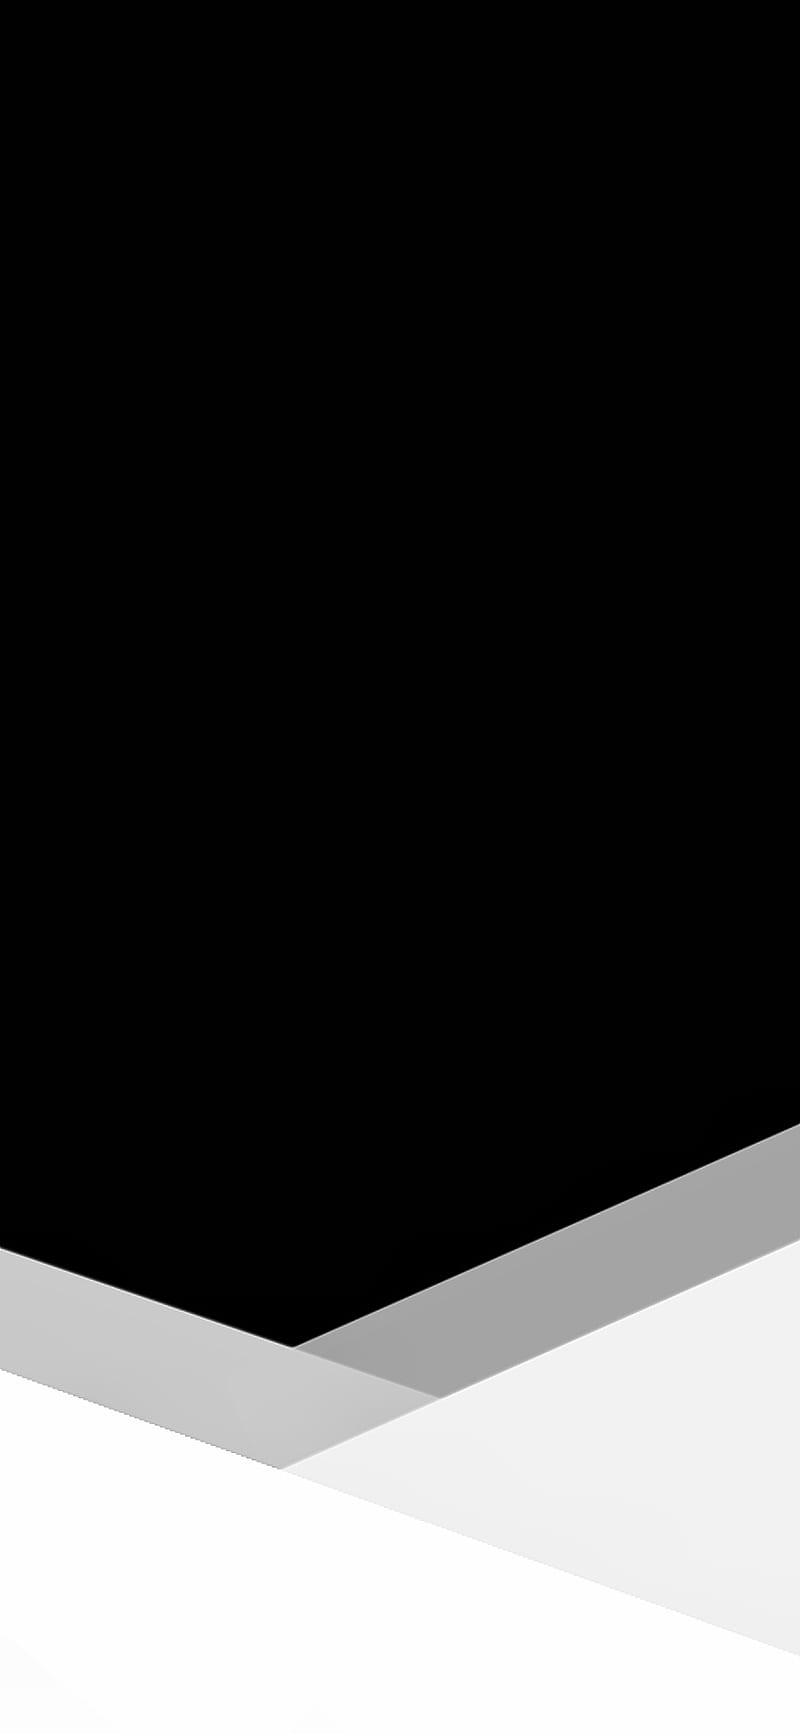 Layers, abstract, amoled, black, cool, grayscale, minimalistic, simple, white, HD phone wallpaper